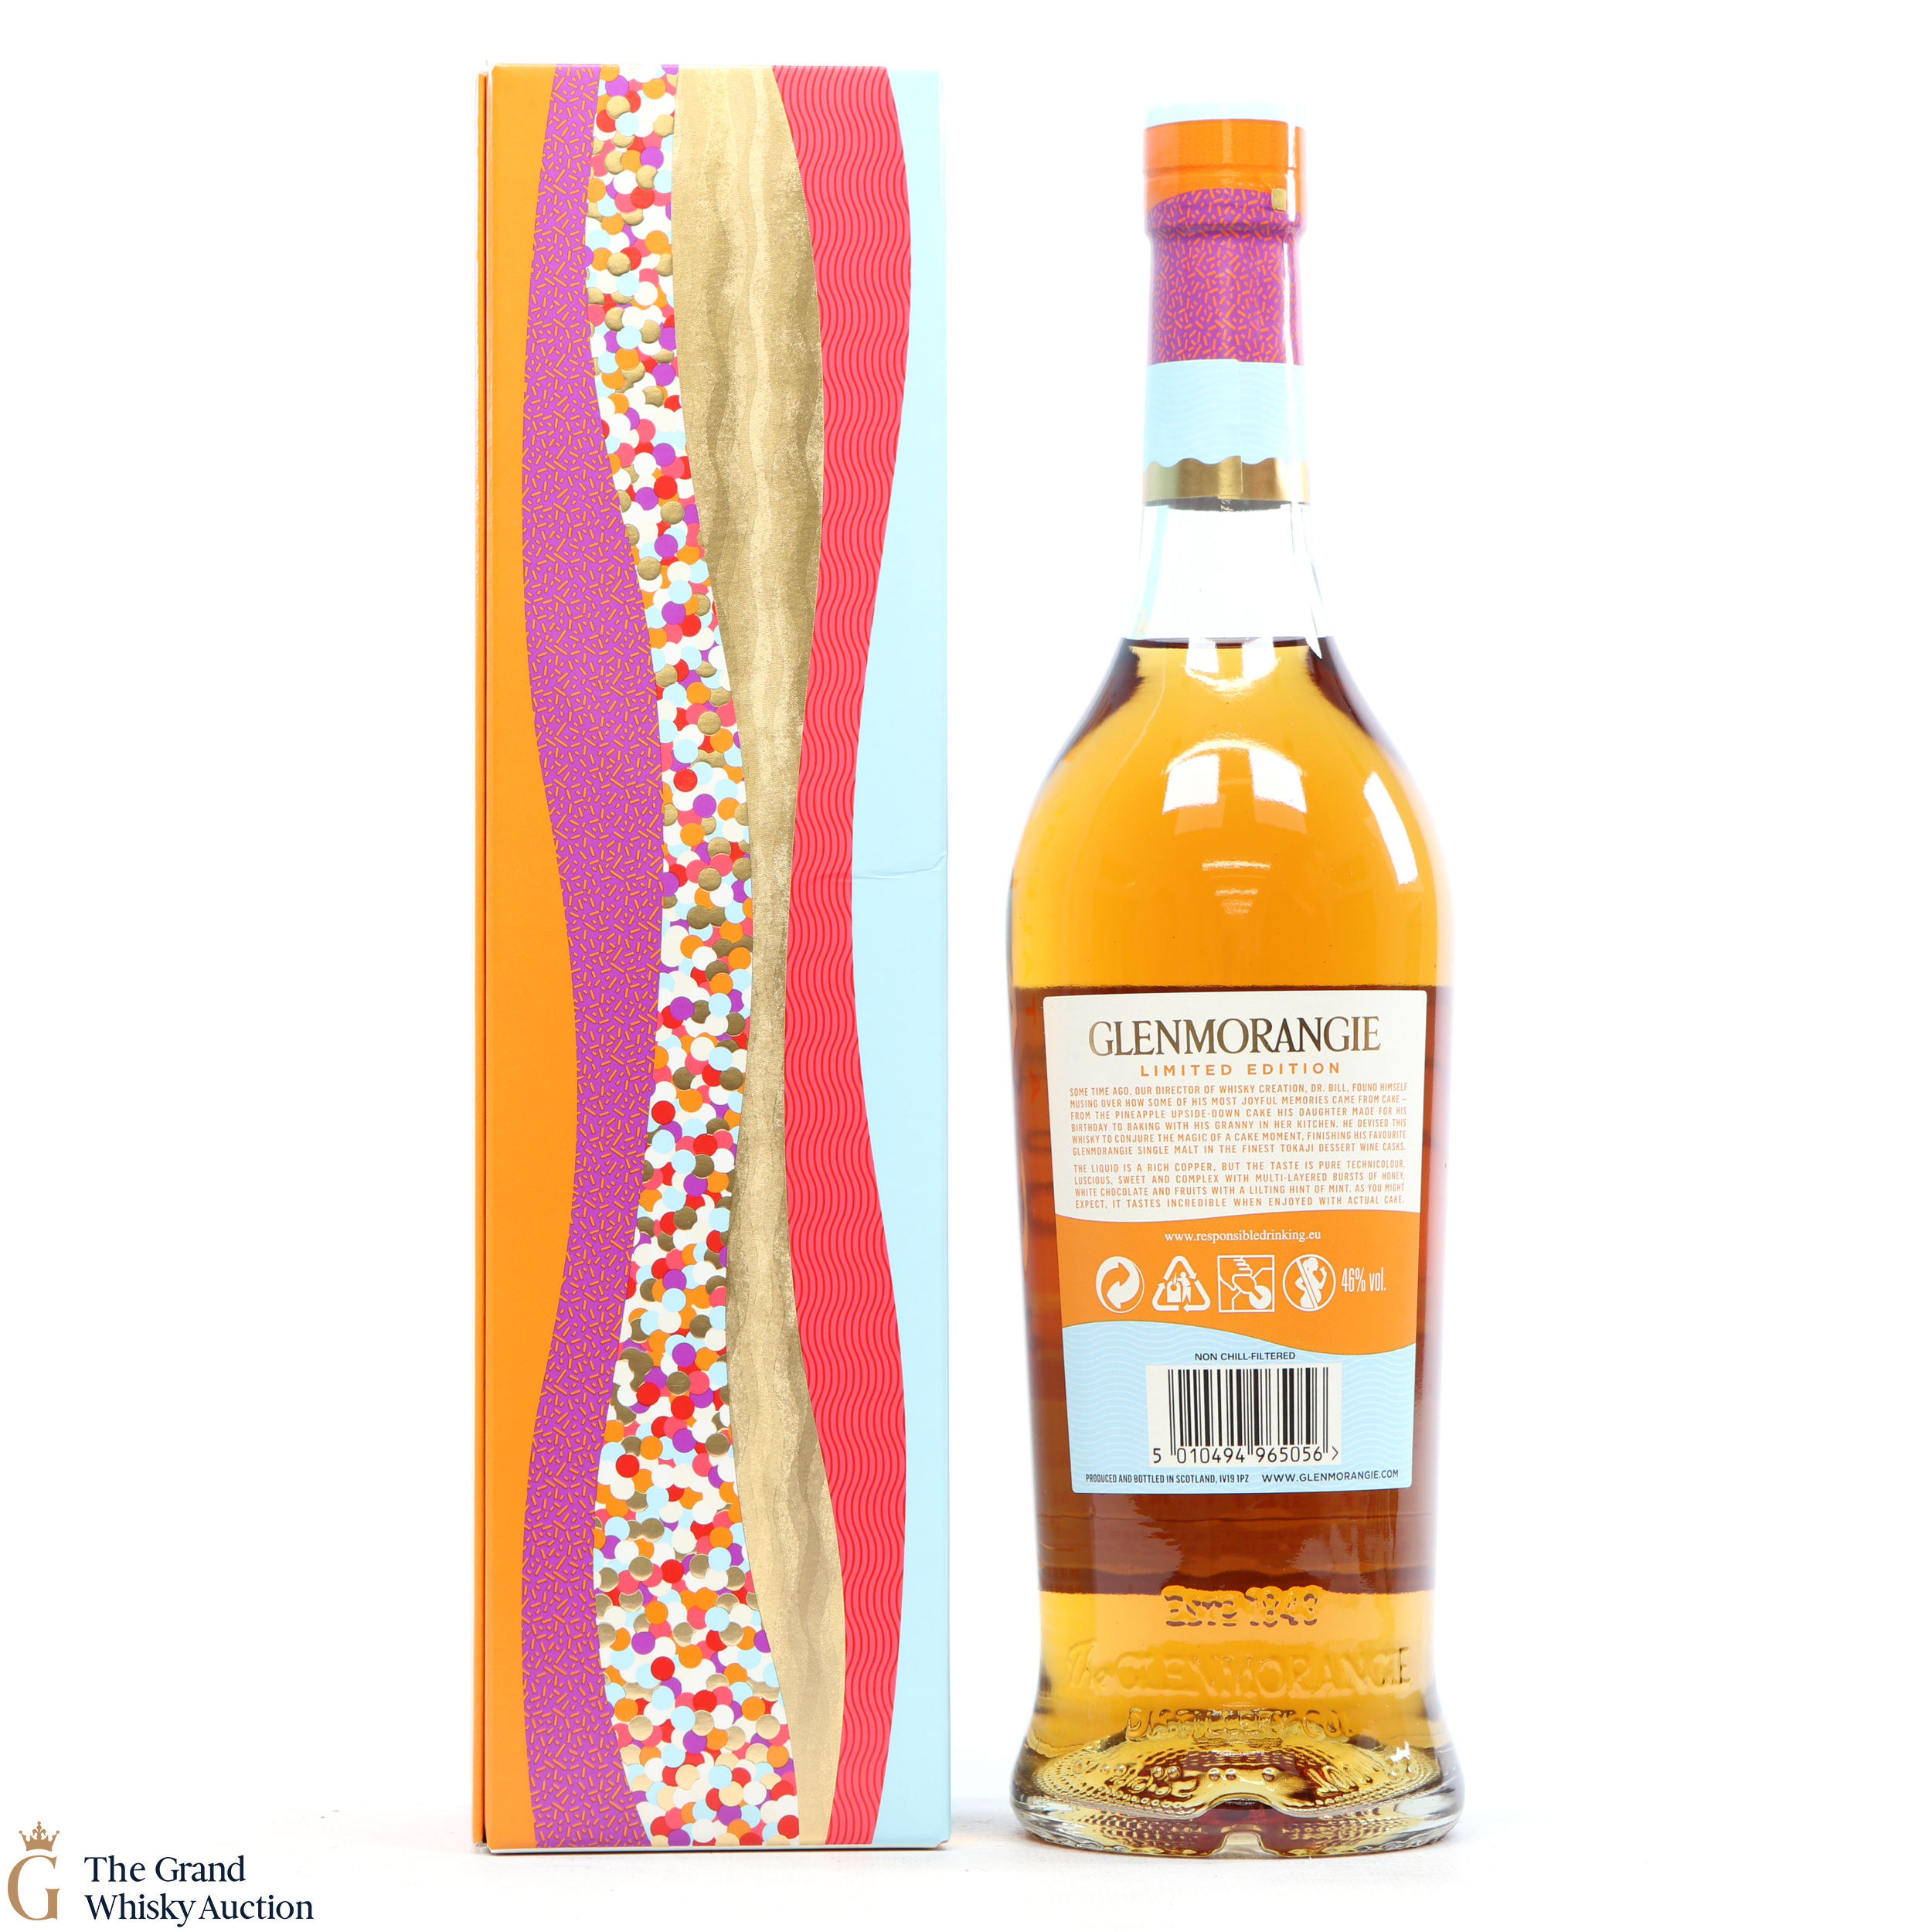 Glenmorangie - A Tale of Cake - Limited Edition Auction | The Grand